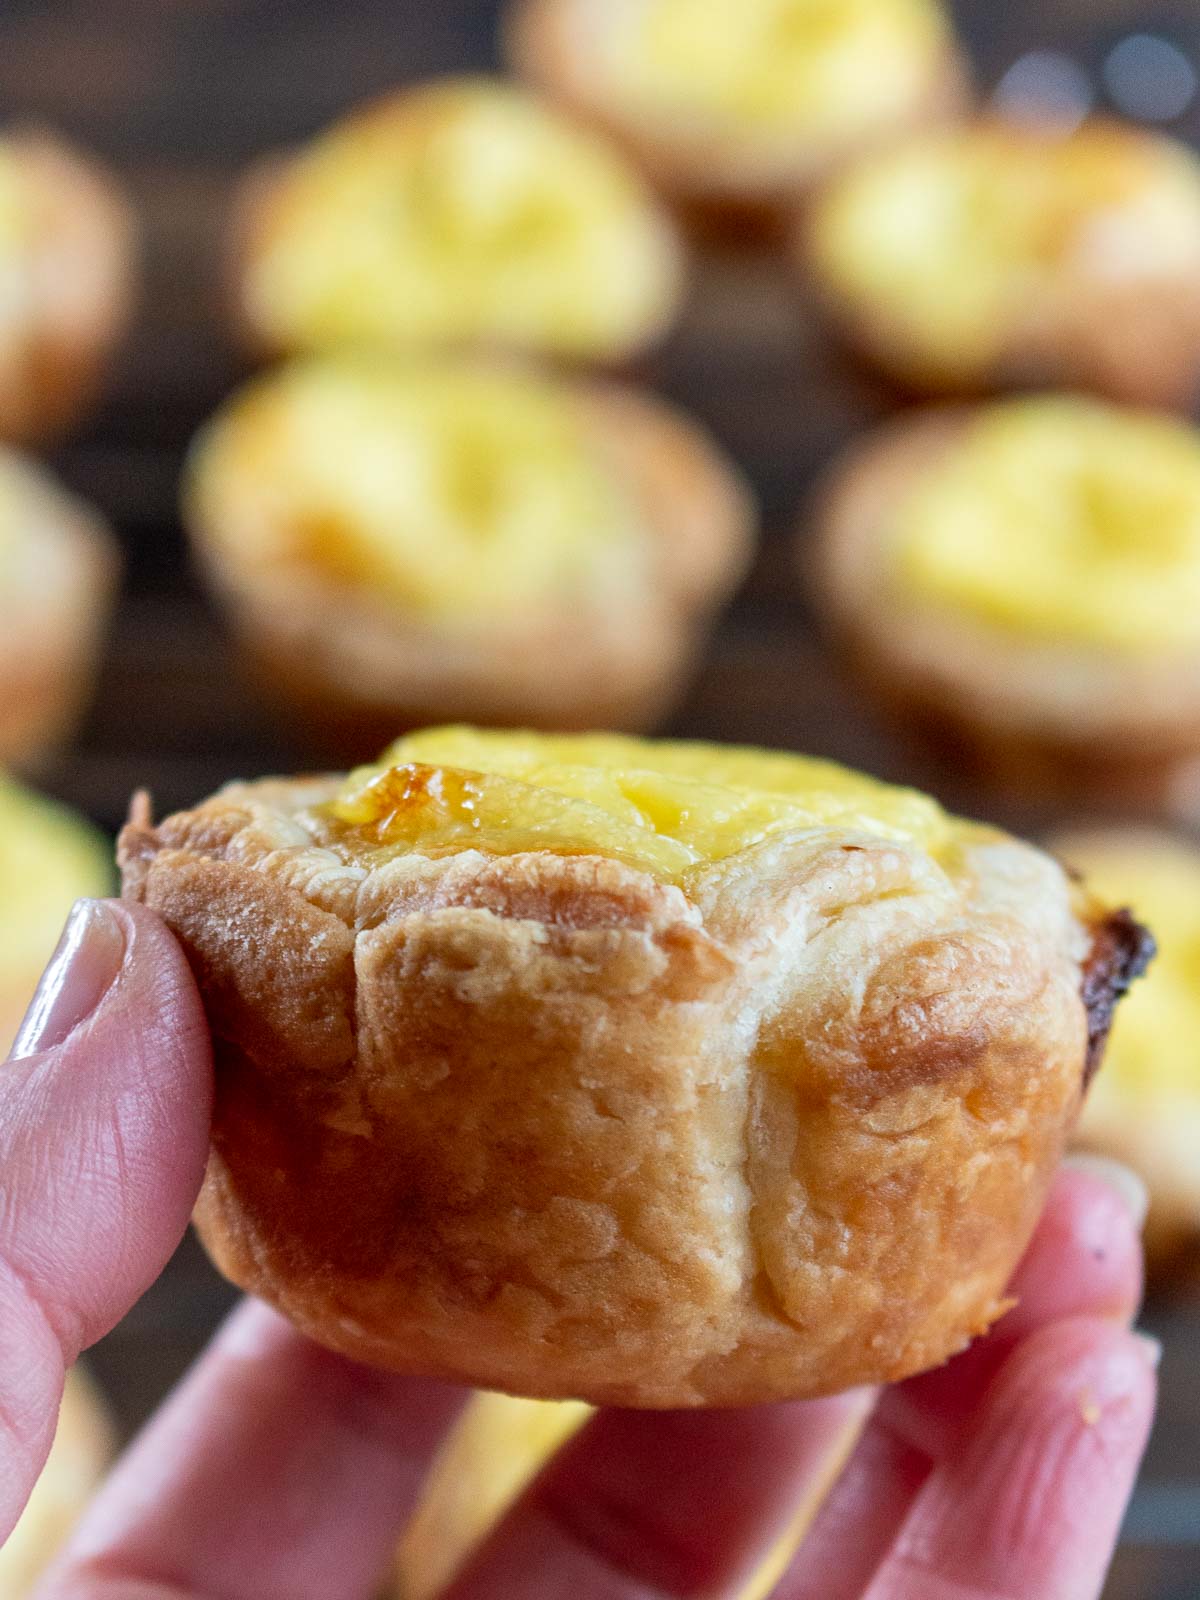 Holding a Hong Kong Style egg tart in the air showing the golden puff pastry dough.